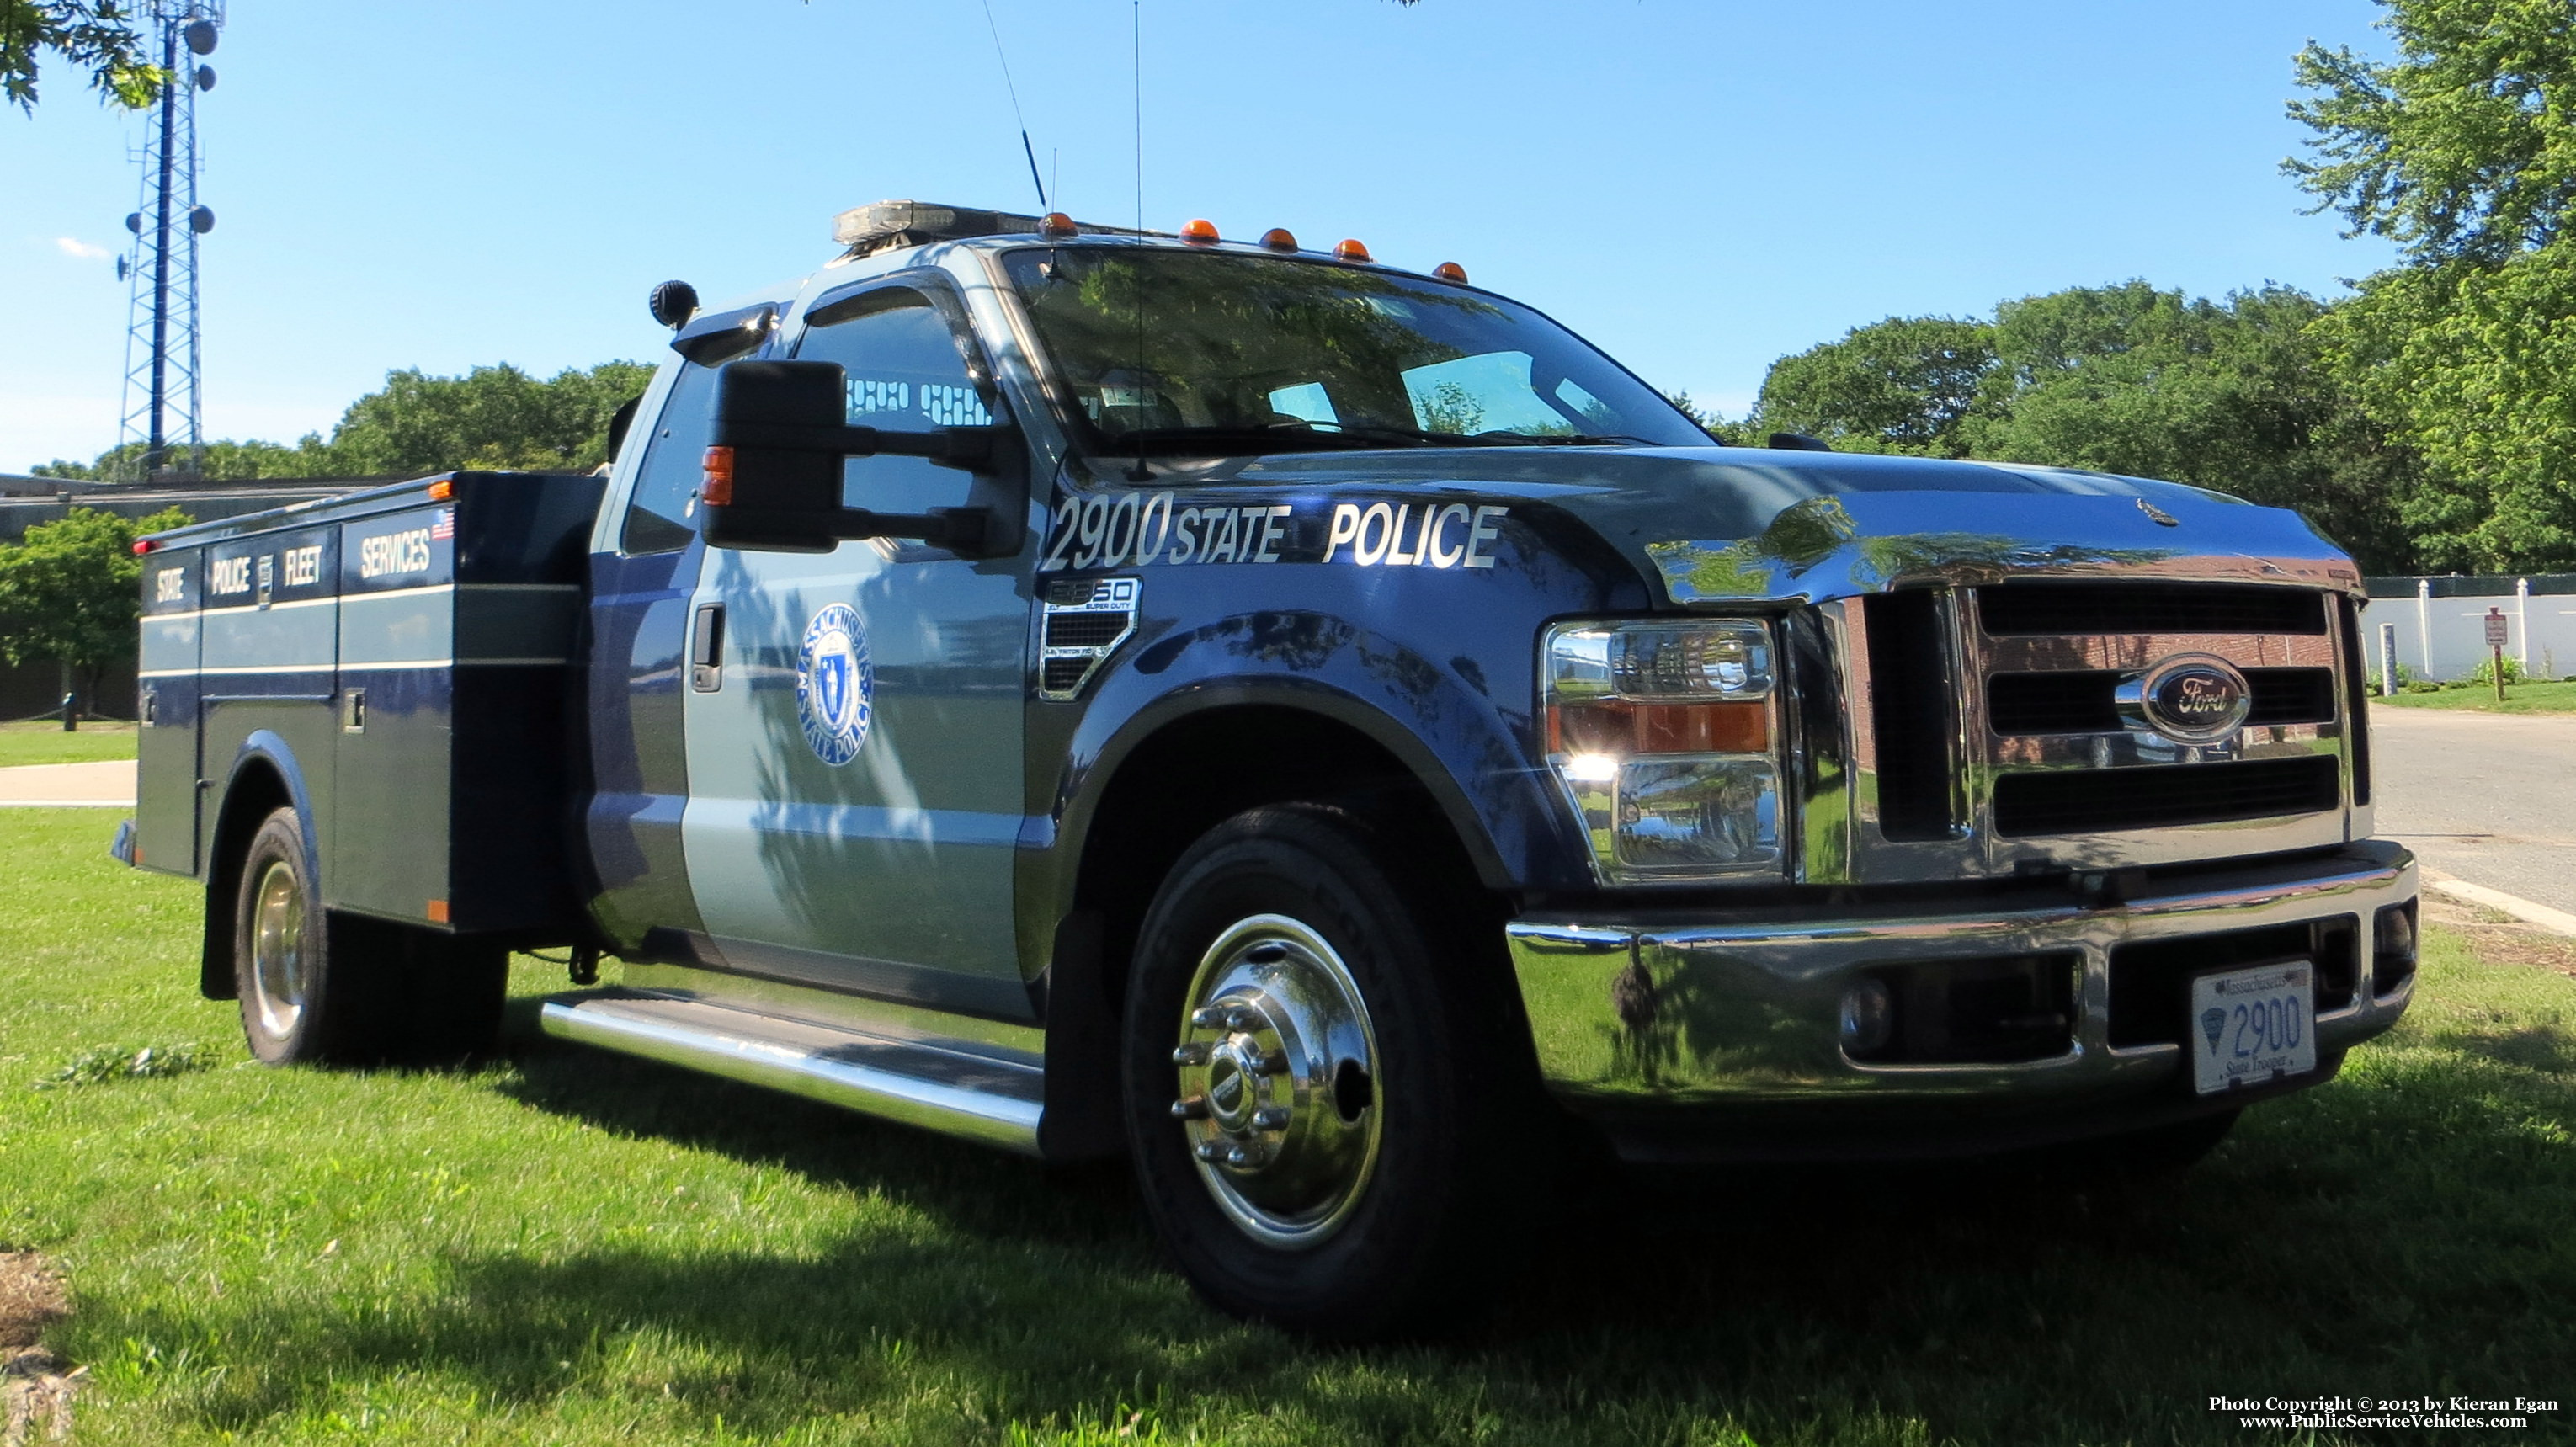 A photo  of Massachusetts State Police
            Truck 2900, a 2008-2010 Ford F-350 Super Cab             taken by Kieran Egan